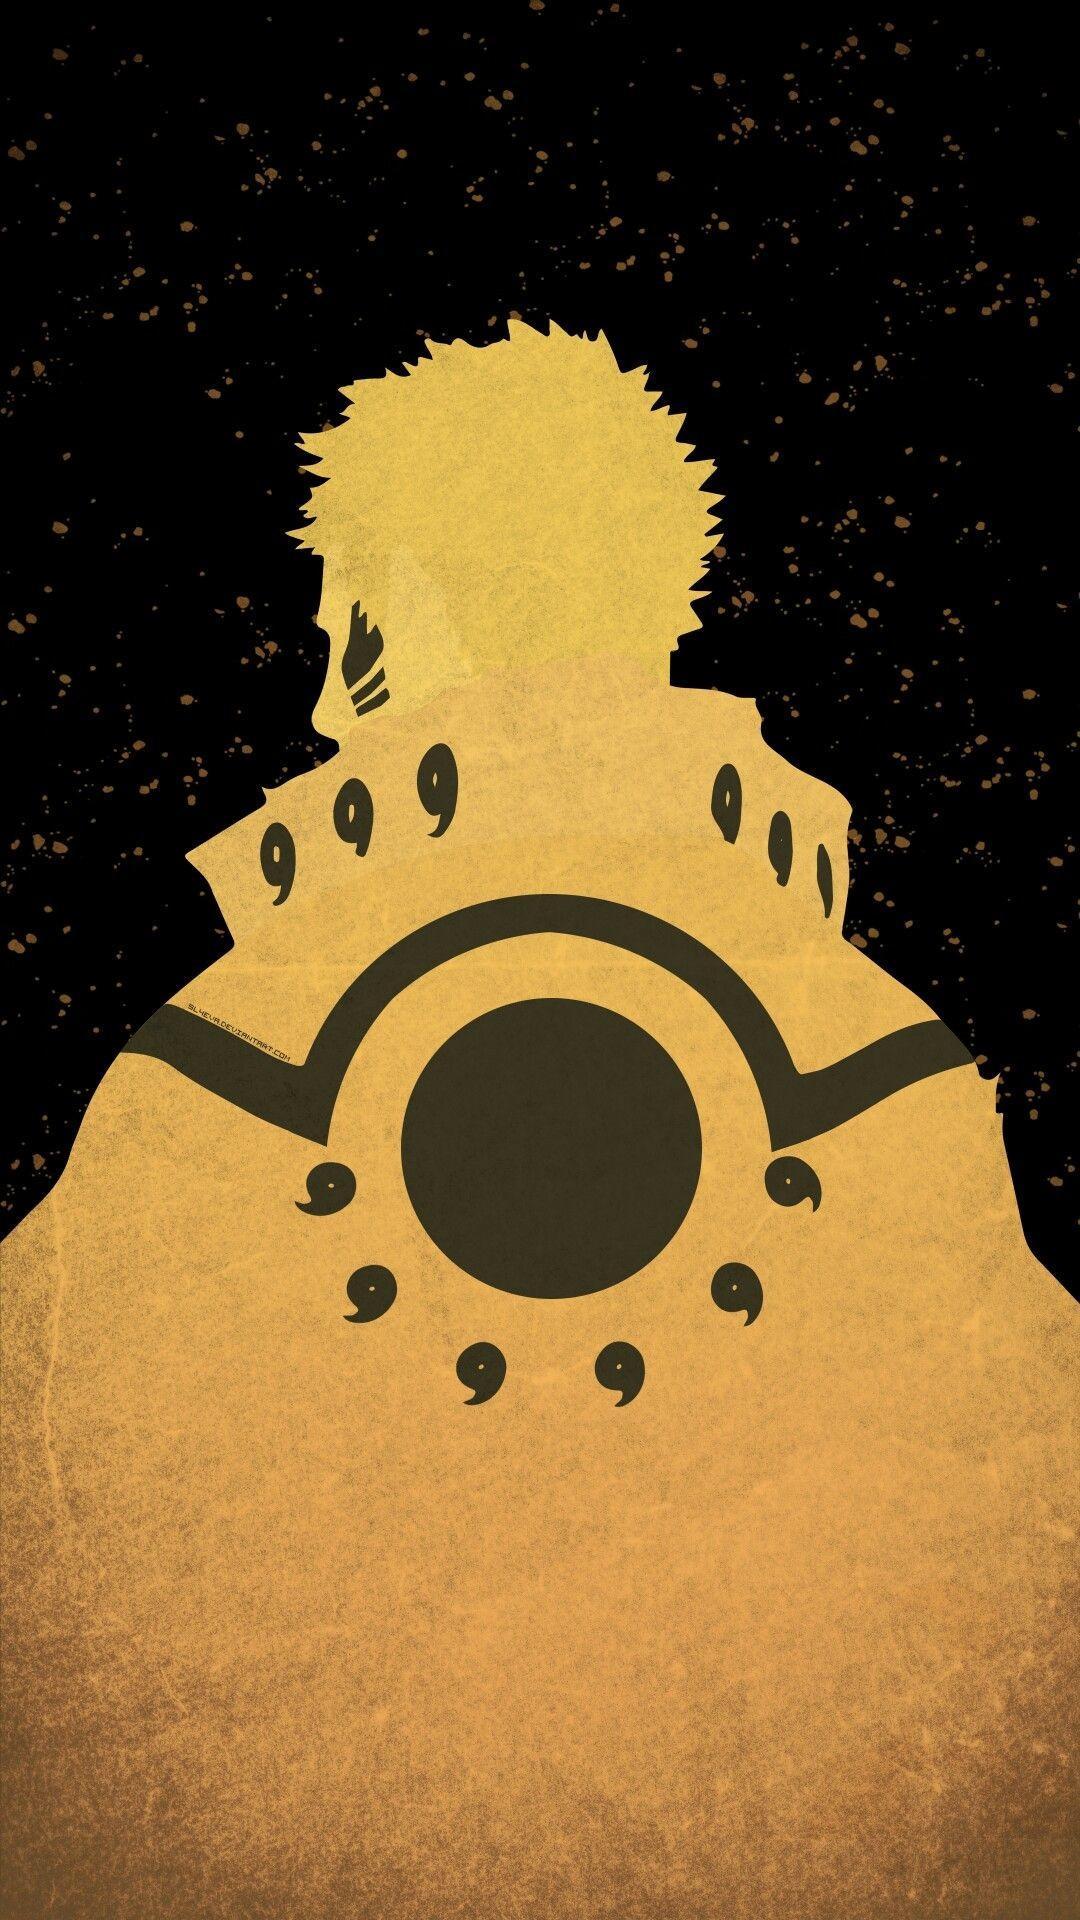 Naruto Iphone 5s Wallpapers Top Free Naruto Iphone 5s Backgrounds Wallpaperaccess